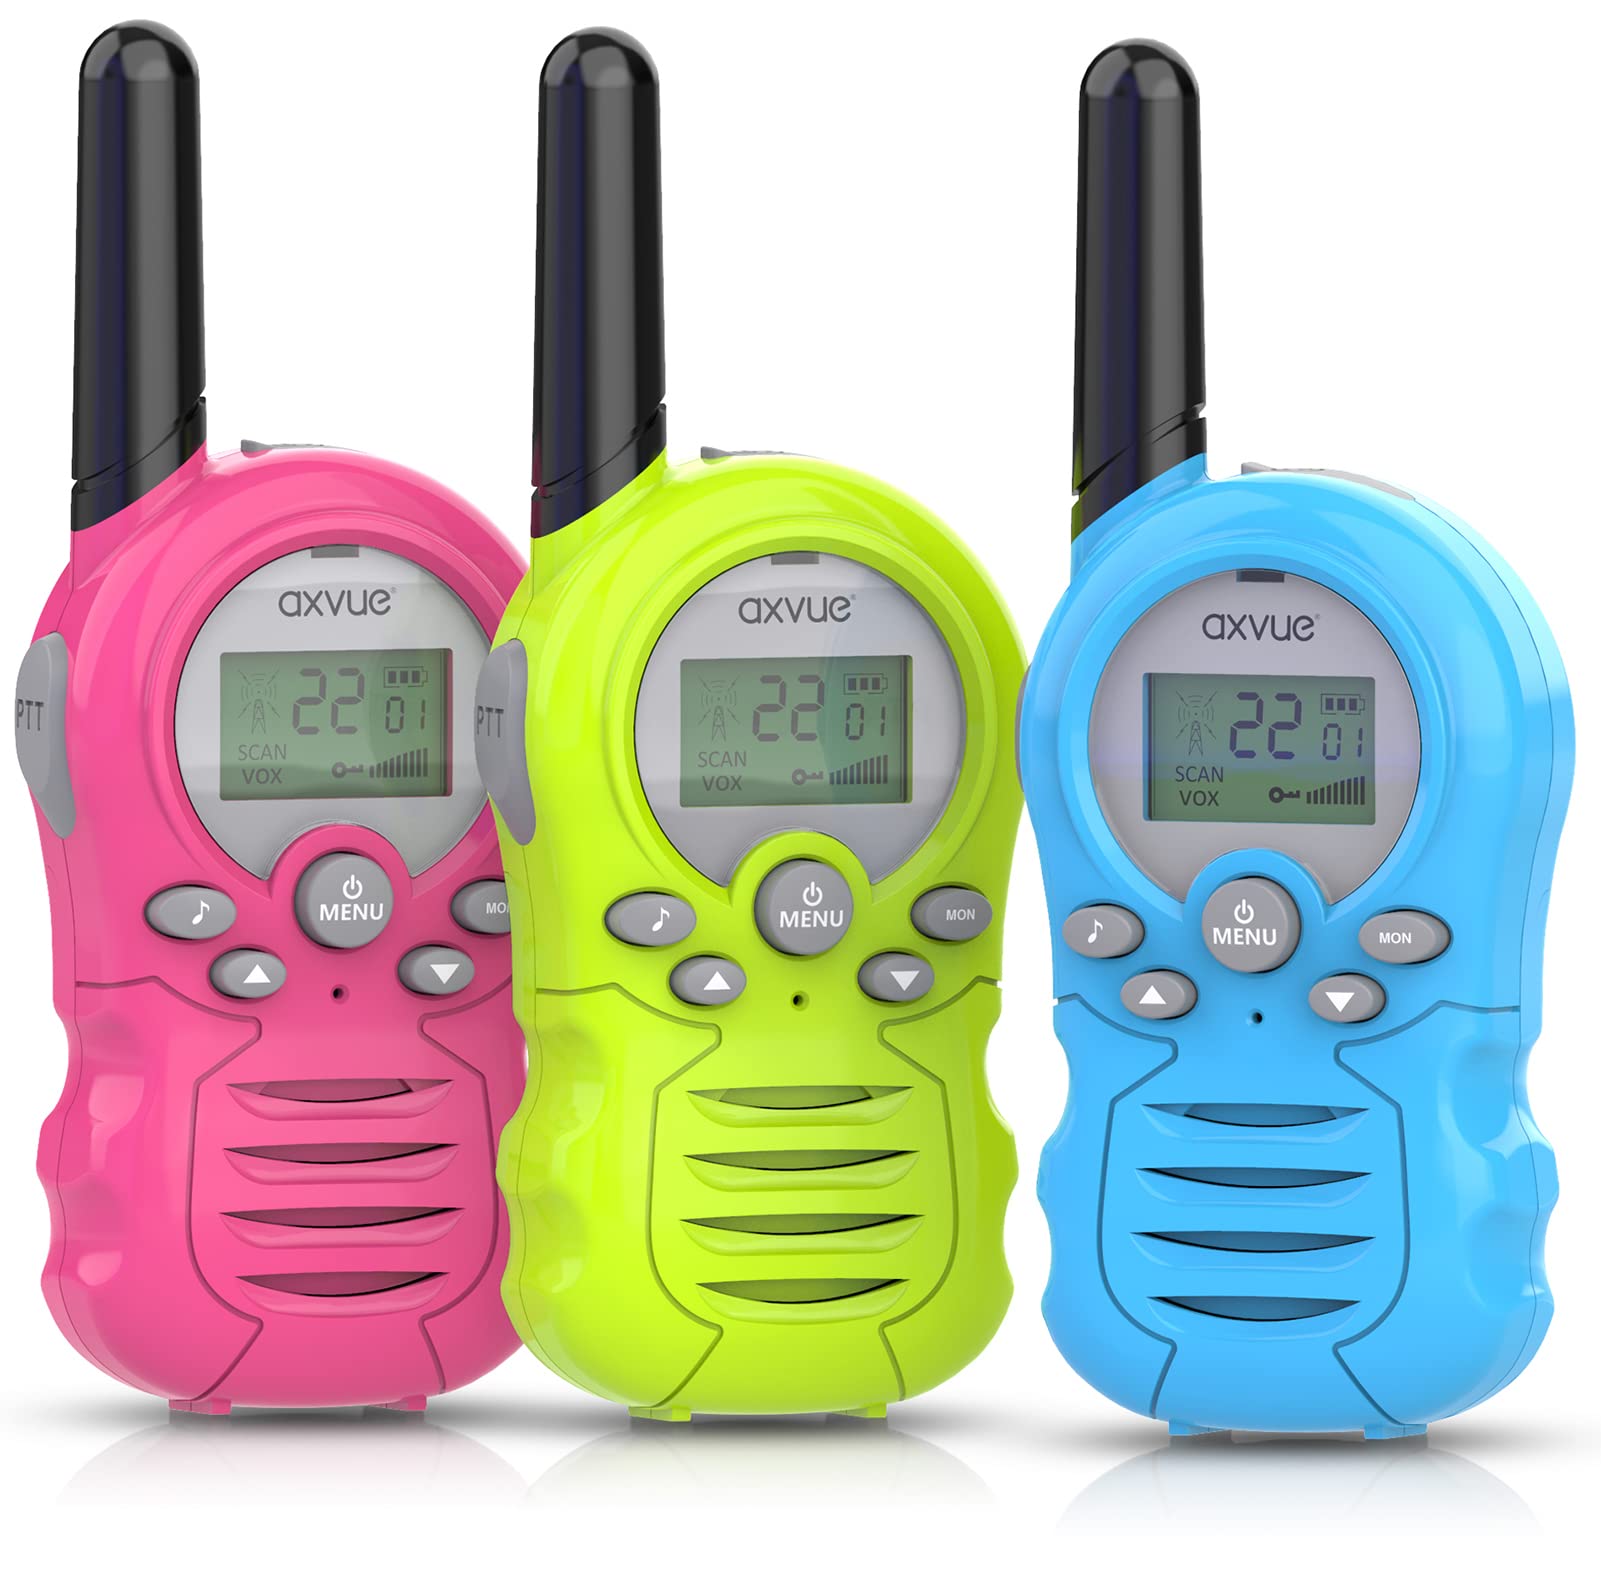 Axvue Walkie Talkies 3 Pack, Festival Birthday Camping Hiking Events Gift Toy for Boys and Girls Kids Teen 22 Channels, Interphone Long Distance, Perfect for Indoor and Outdoor Use, Two Way Radio.